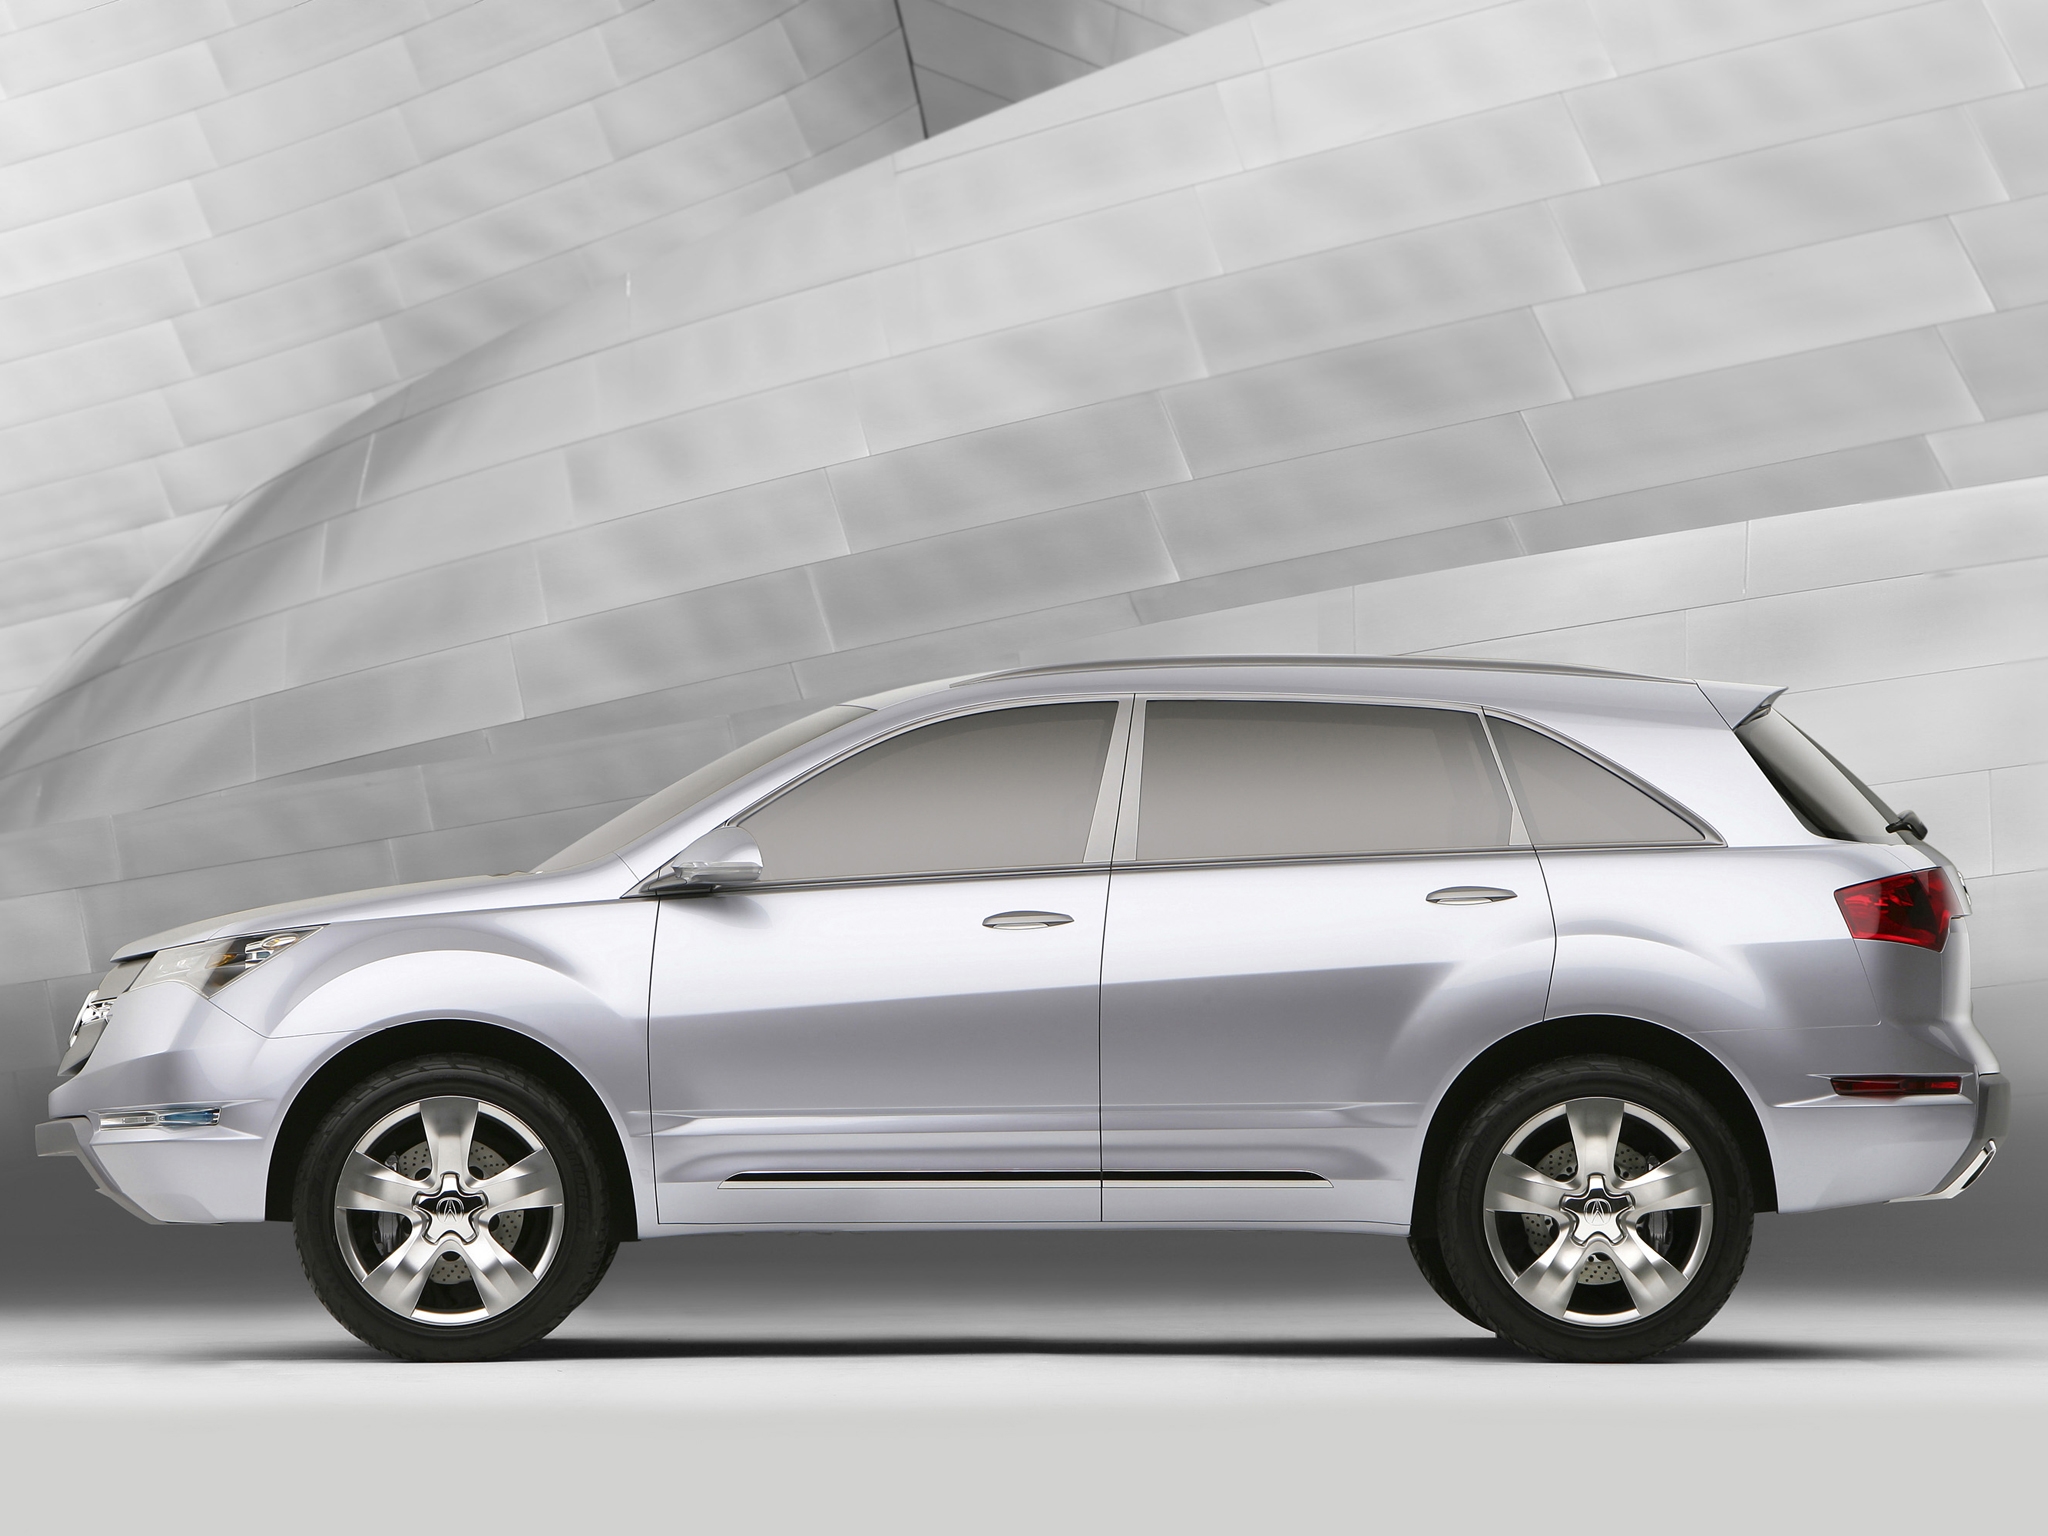 acura, cars, white, jeep, concept, side view, style, concept car, 2006, mdx